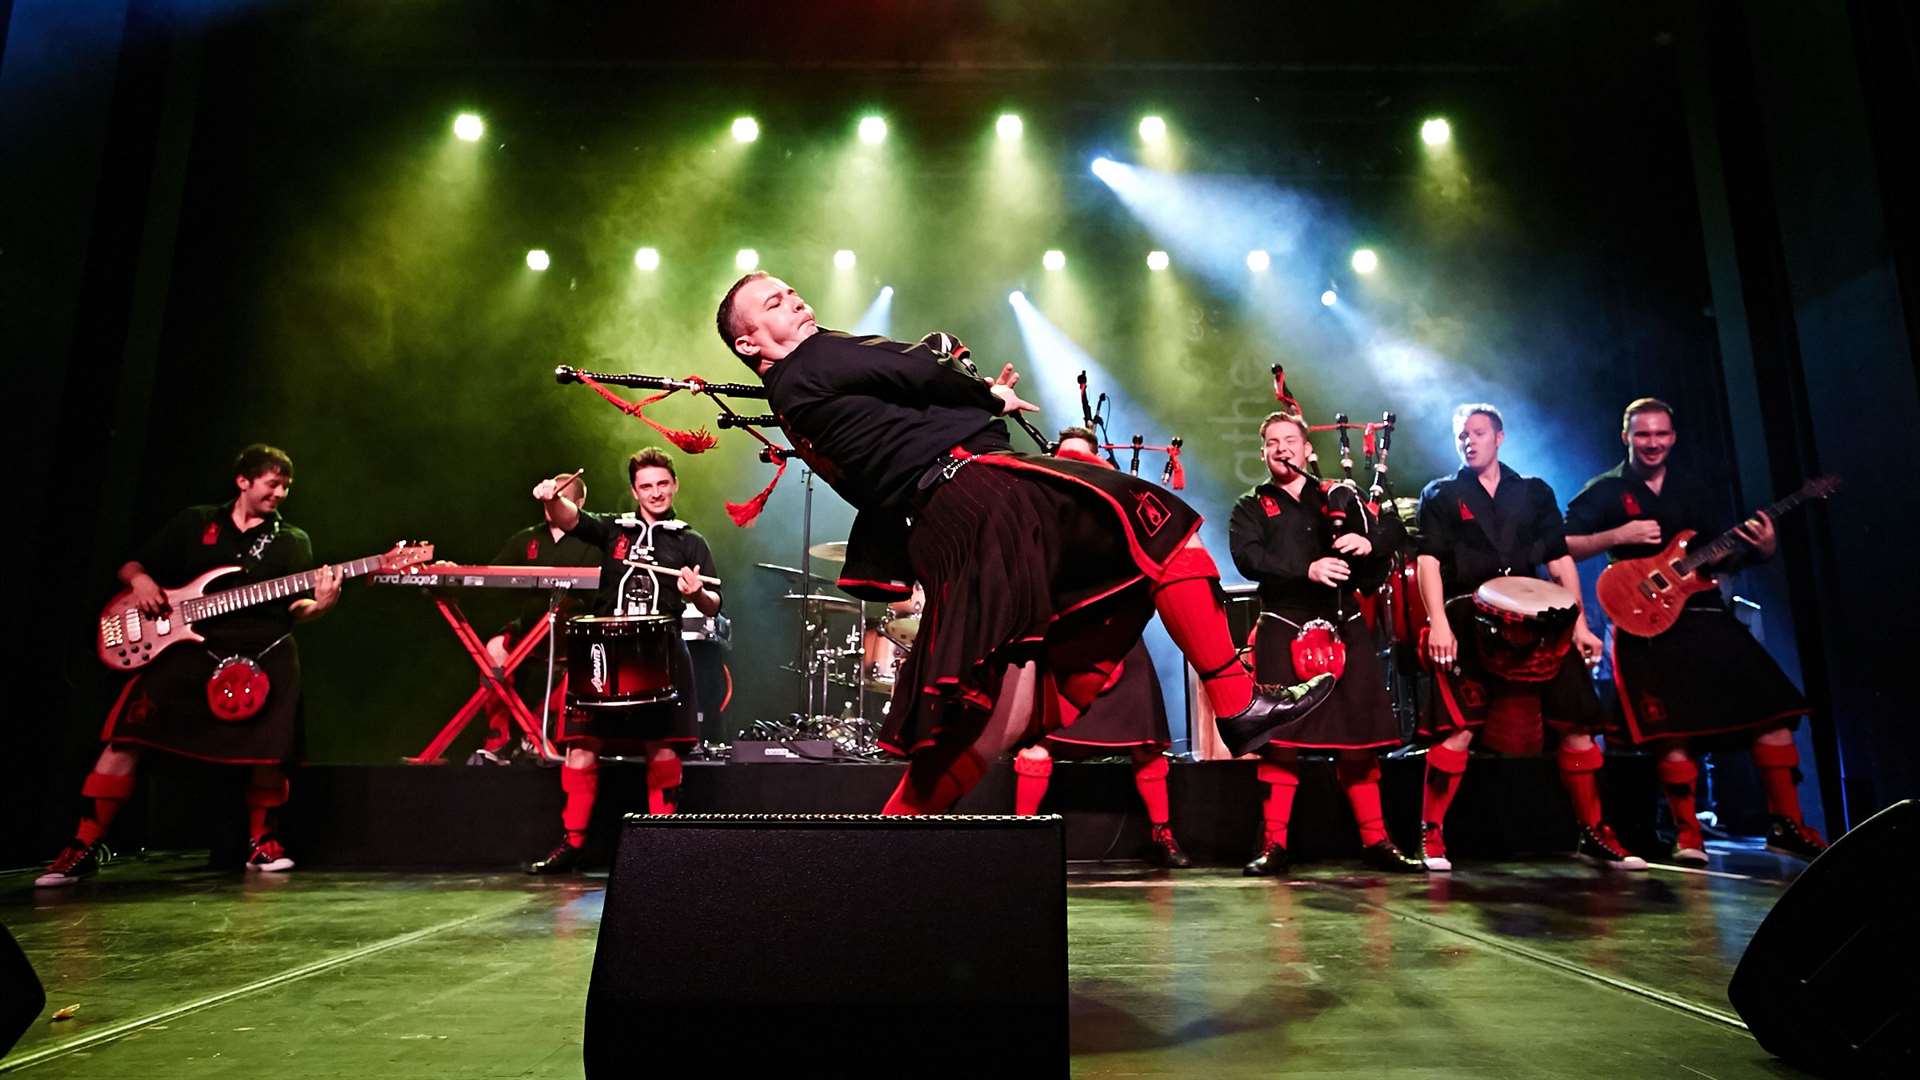 Red Hot Chili Pipers were to headline the event this summer.